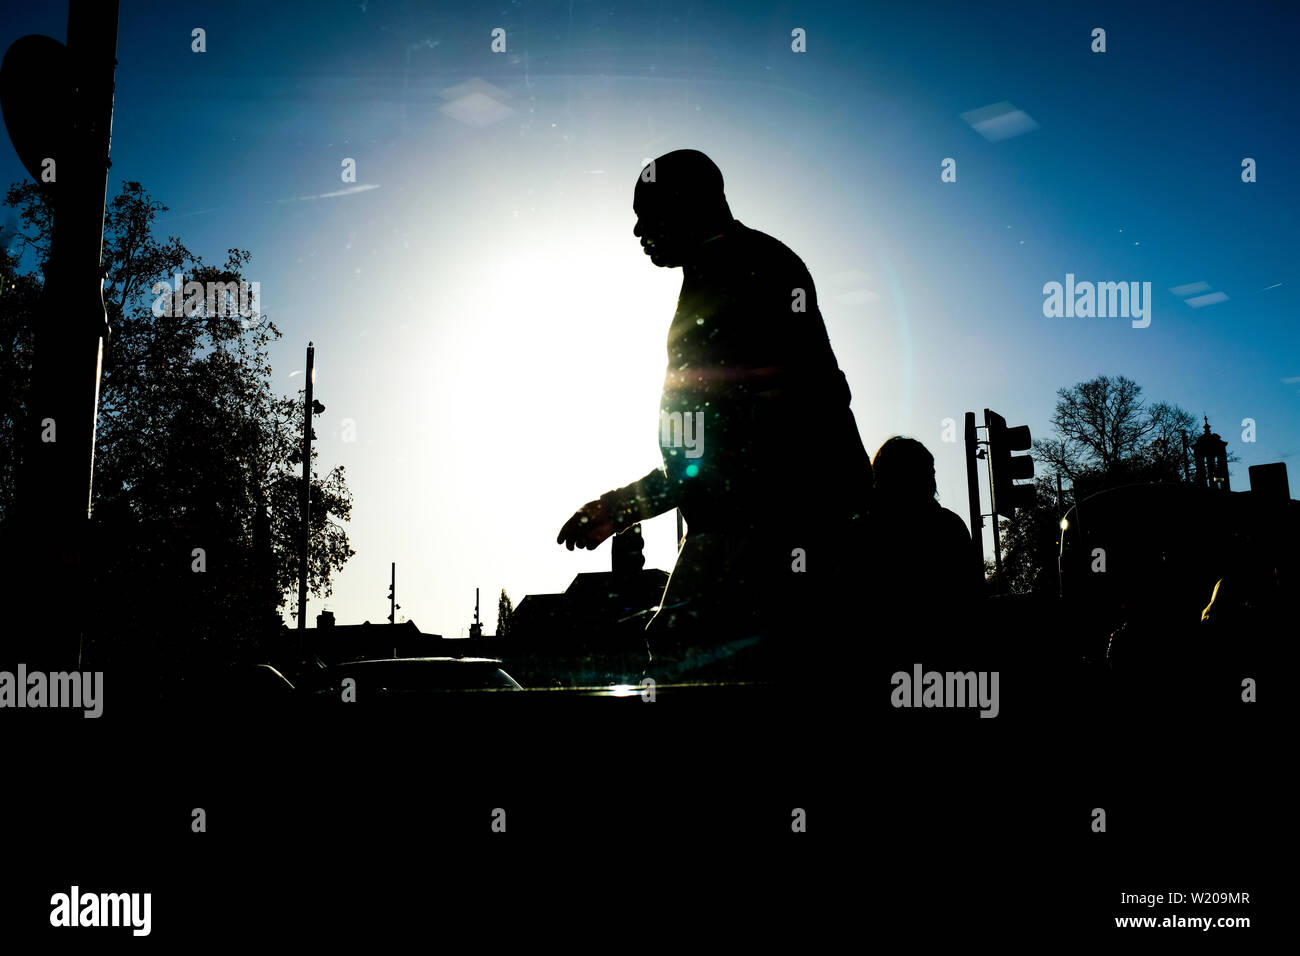 Silhouette of person of color walking, Brixton, London England Stock Photo